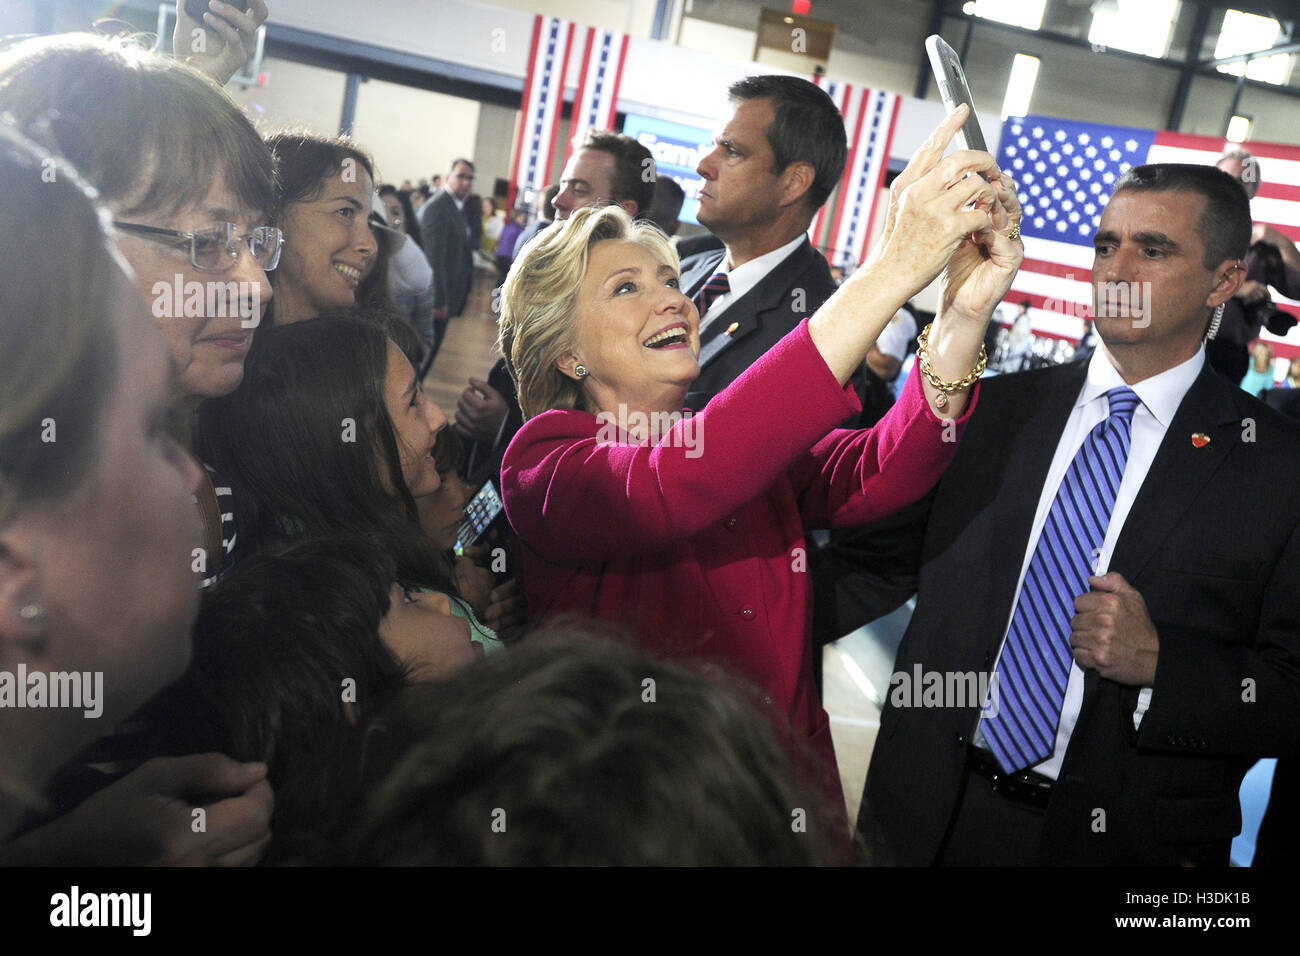 Haverford, USA. 4th Oct, 2016. Hillary Clinton greets supporters after a conversation with families about her agenda to support children and families and create an economy that works for everyone at Haverford Community Recreation & Environmental Center on October 4, 2016 in Haverford, USA. | Verwendung weltweit/picture alliance © dpa/Alamy Live News Stock Photo